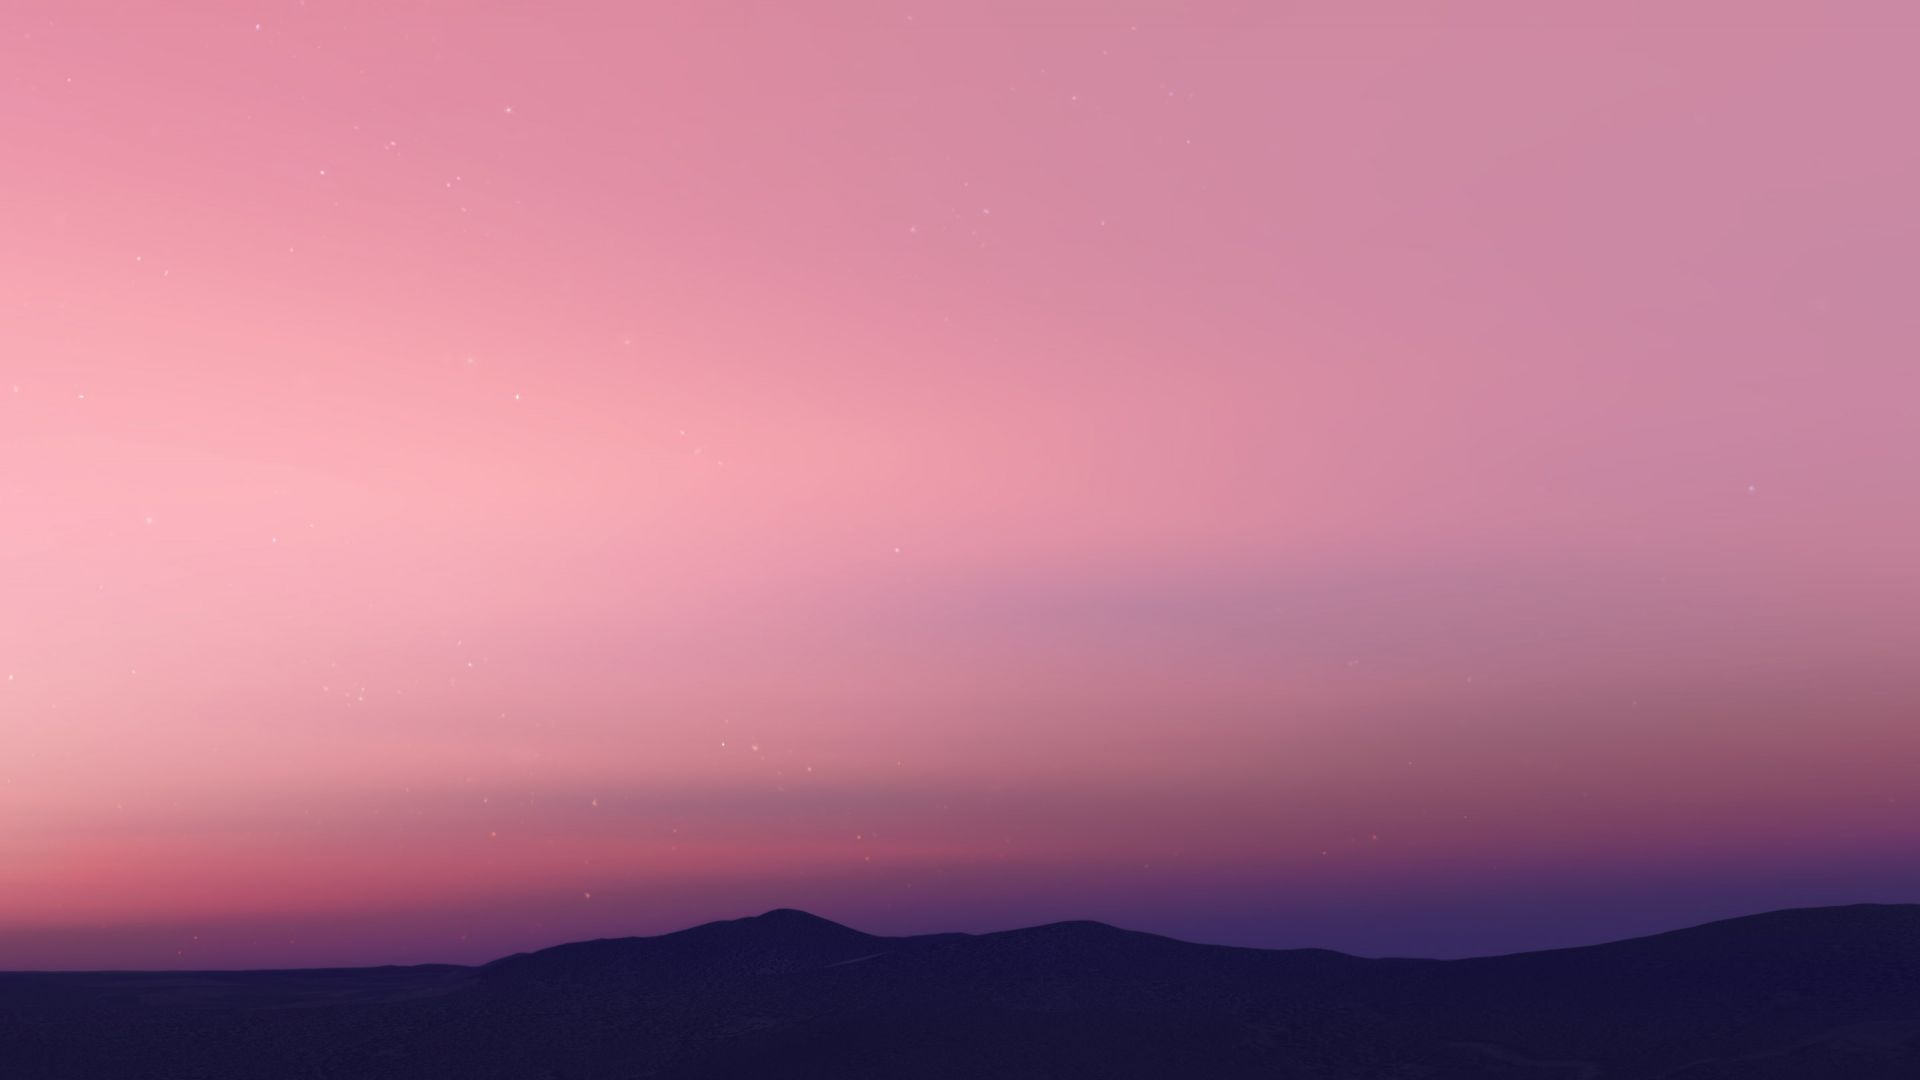 Desktop Wallpaper Android Oreo, Pink Skyline, Sunset, Android Stock, Hd  Image, Picture, Background, C24e41